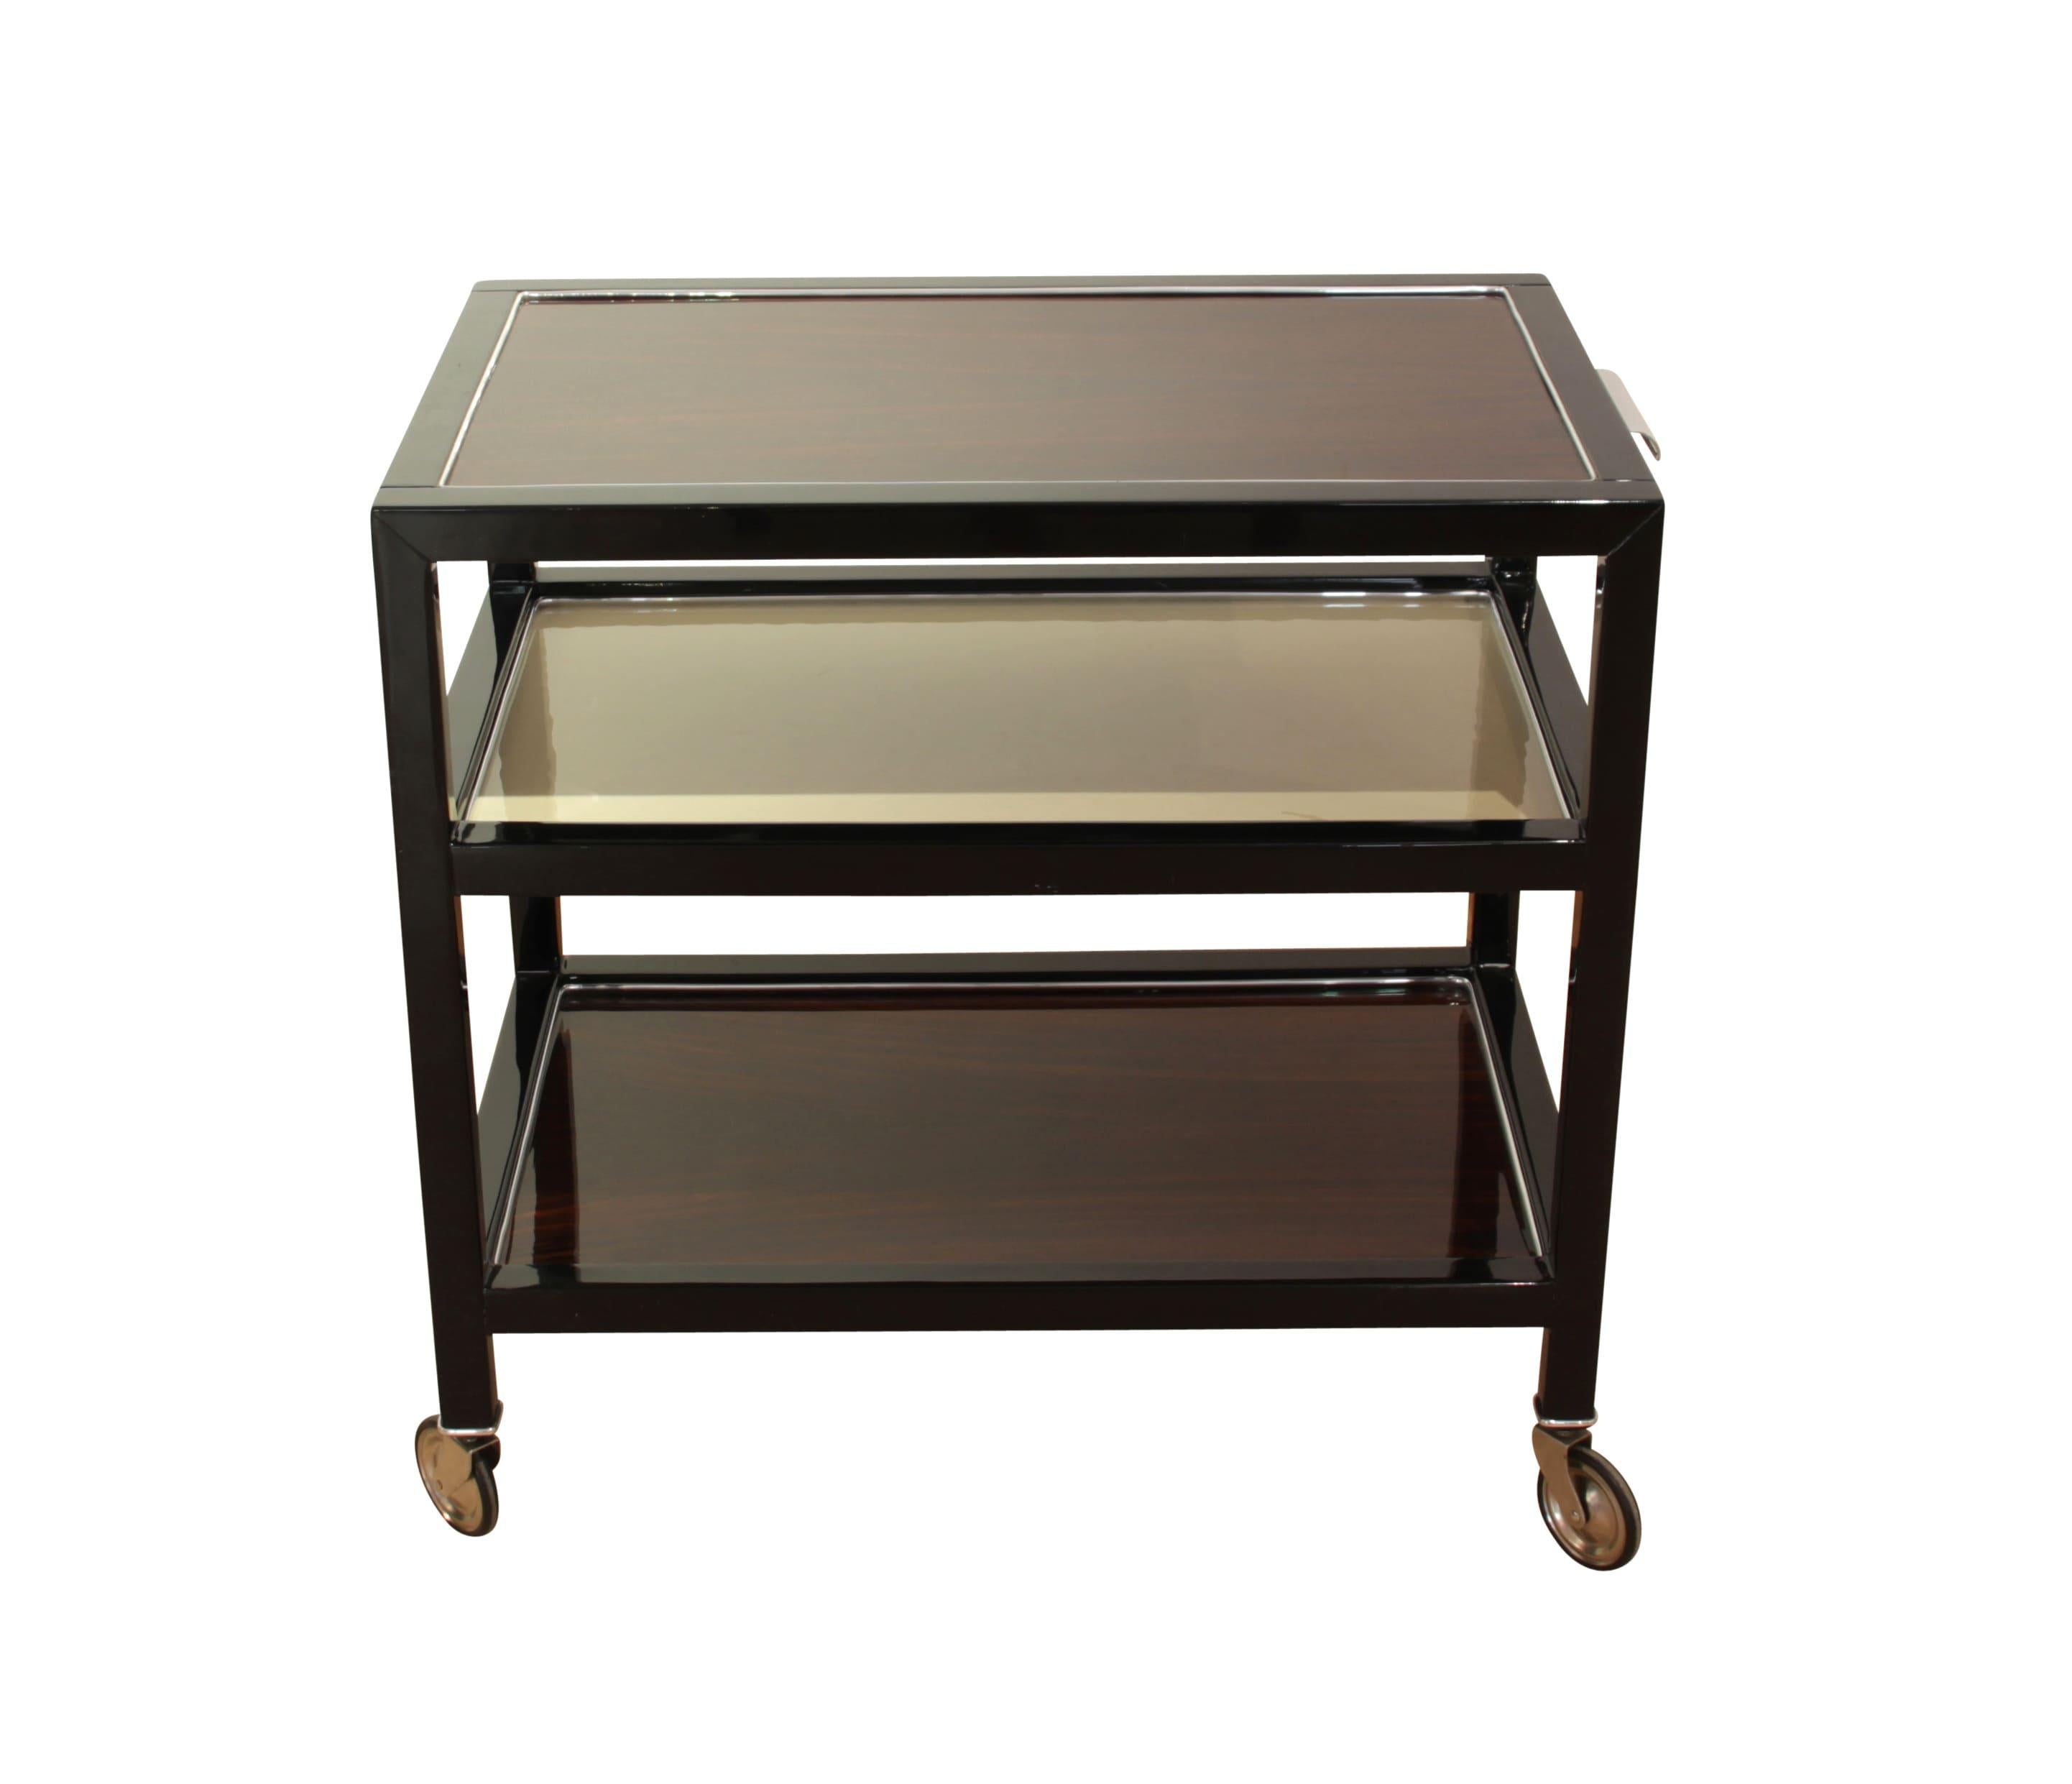 Beautiful Art Deco Serving Table, Rosewood and Black Lacquer, France, circa 1940

Rosewood veneer (upper and lower plate). Frame in black piano lacquer, middle bottom in cream-white lacquer.
Silver-colored ribbon around the top plate. Mobile on 4